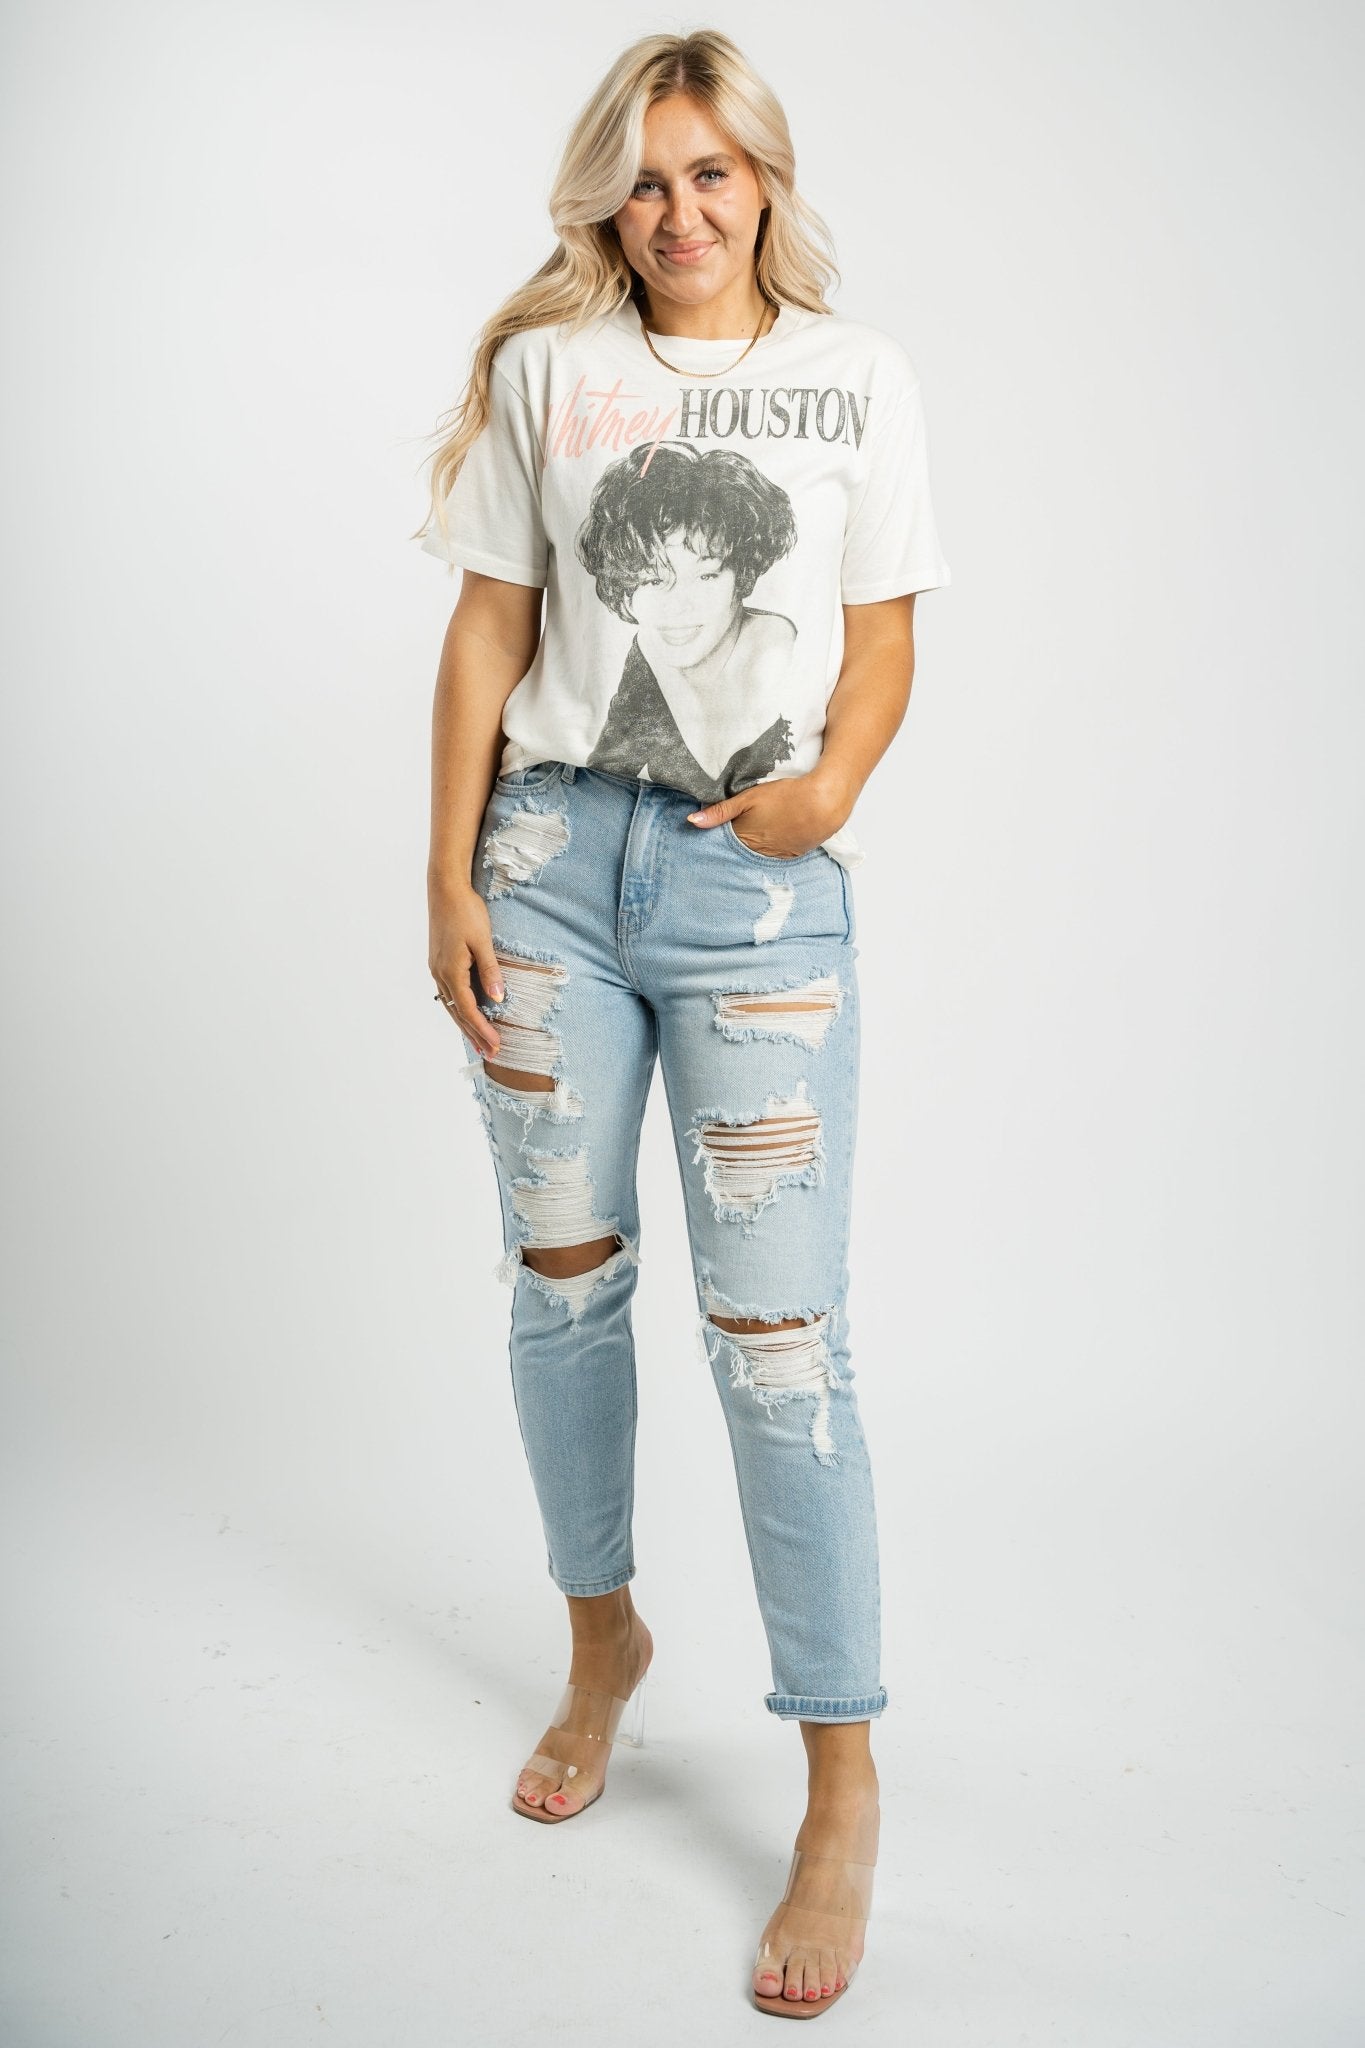 DayDreamer Whitney Houston fan club weekend tee - Vintage Band T-Shirts and Sweatshirts at Lush Fashion Lounge Boutique in Oklahoma City